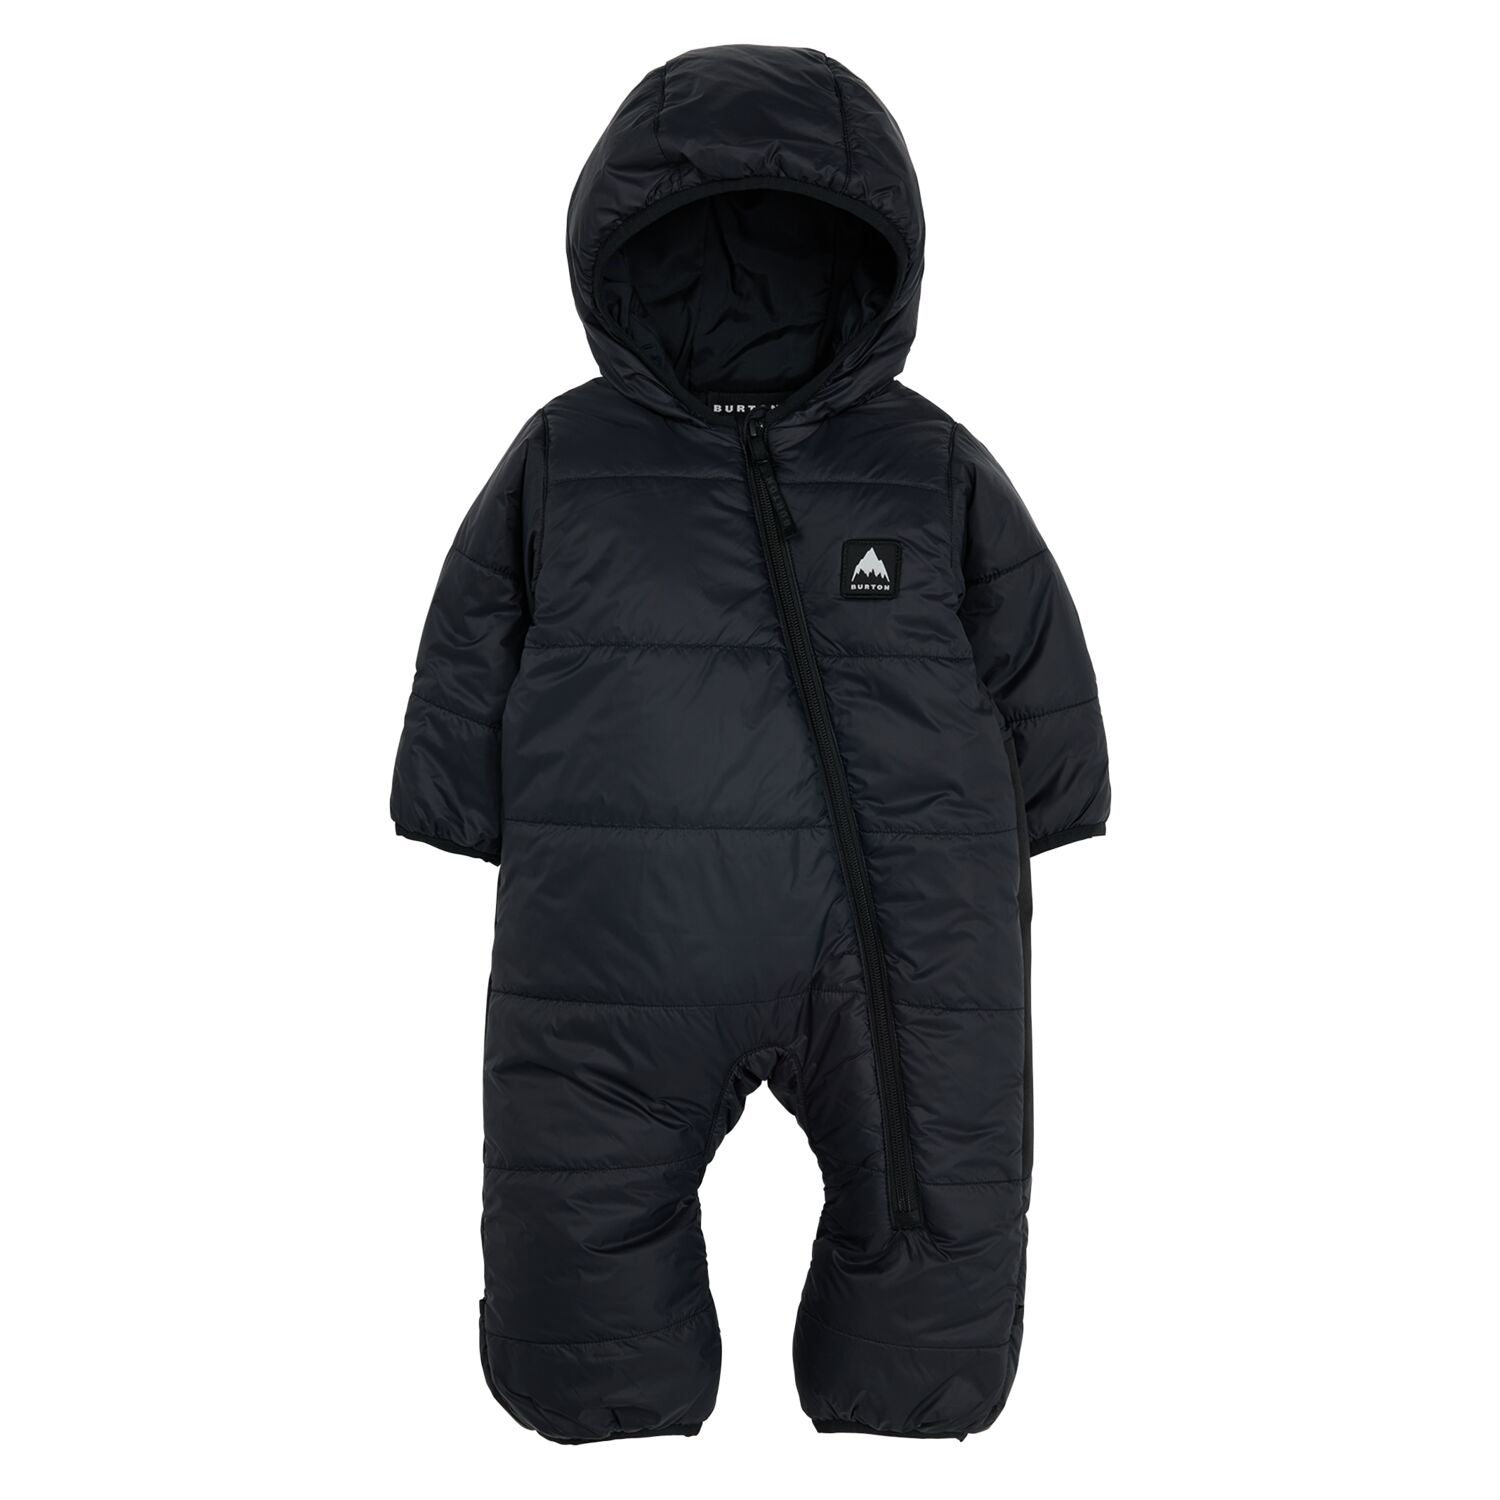 Toddlers' Buddy Bunting Suit, True Black